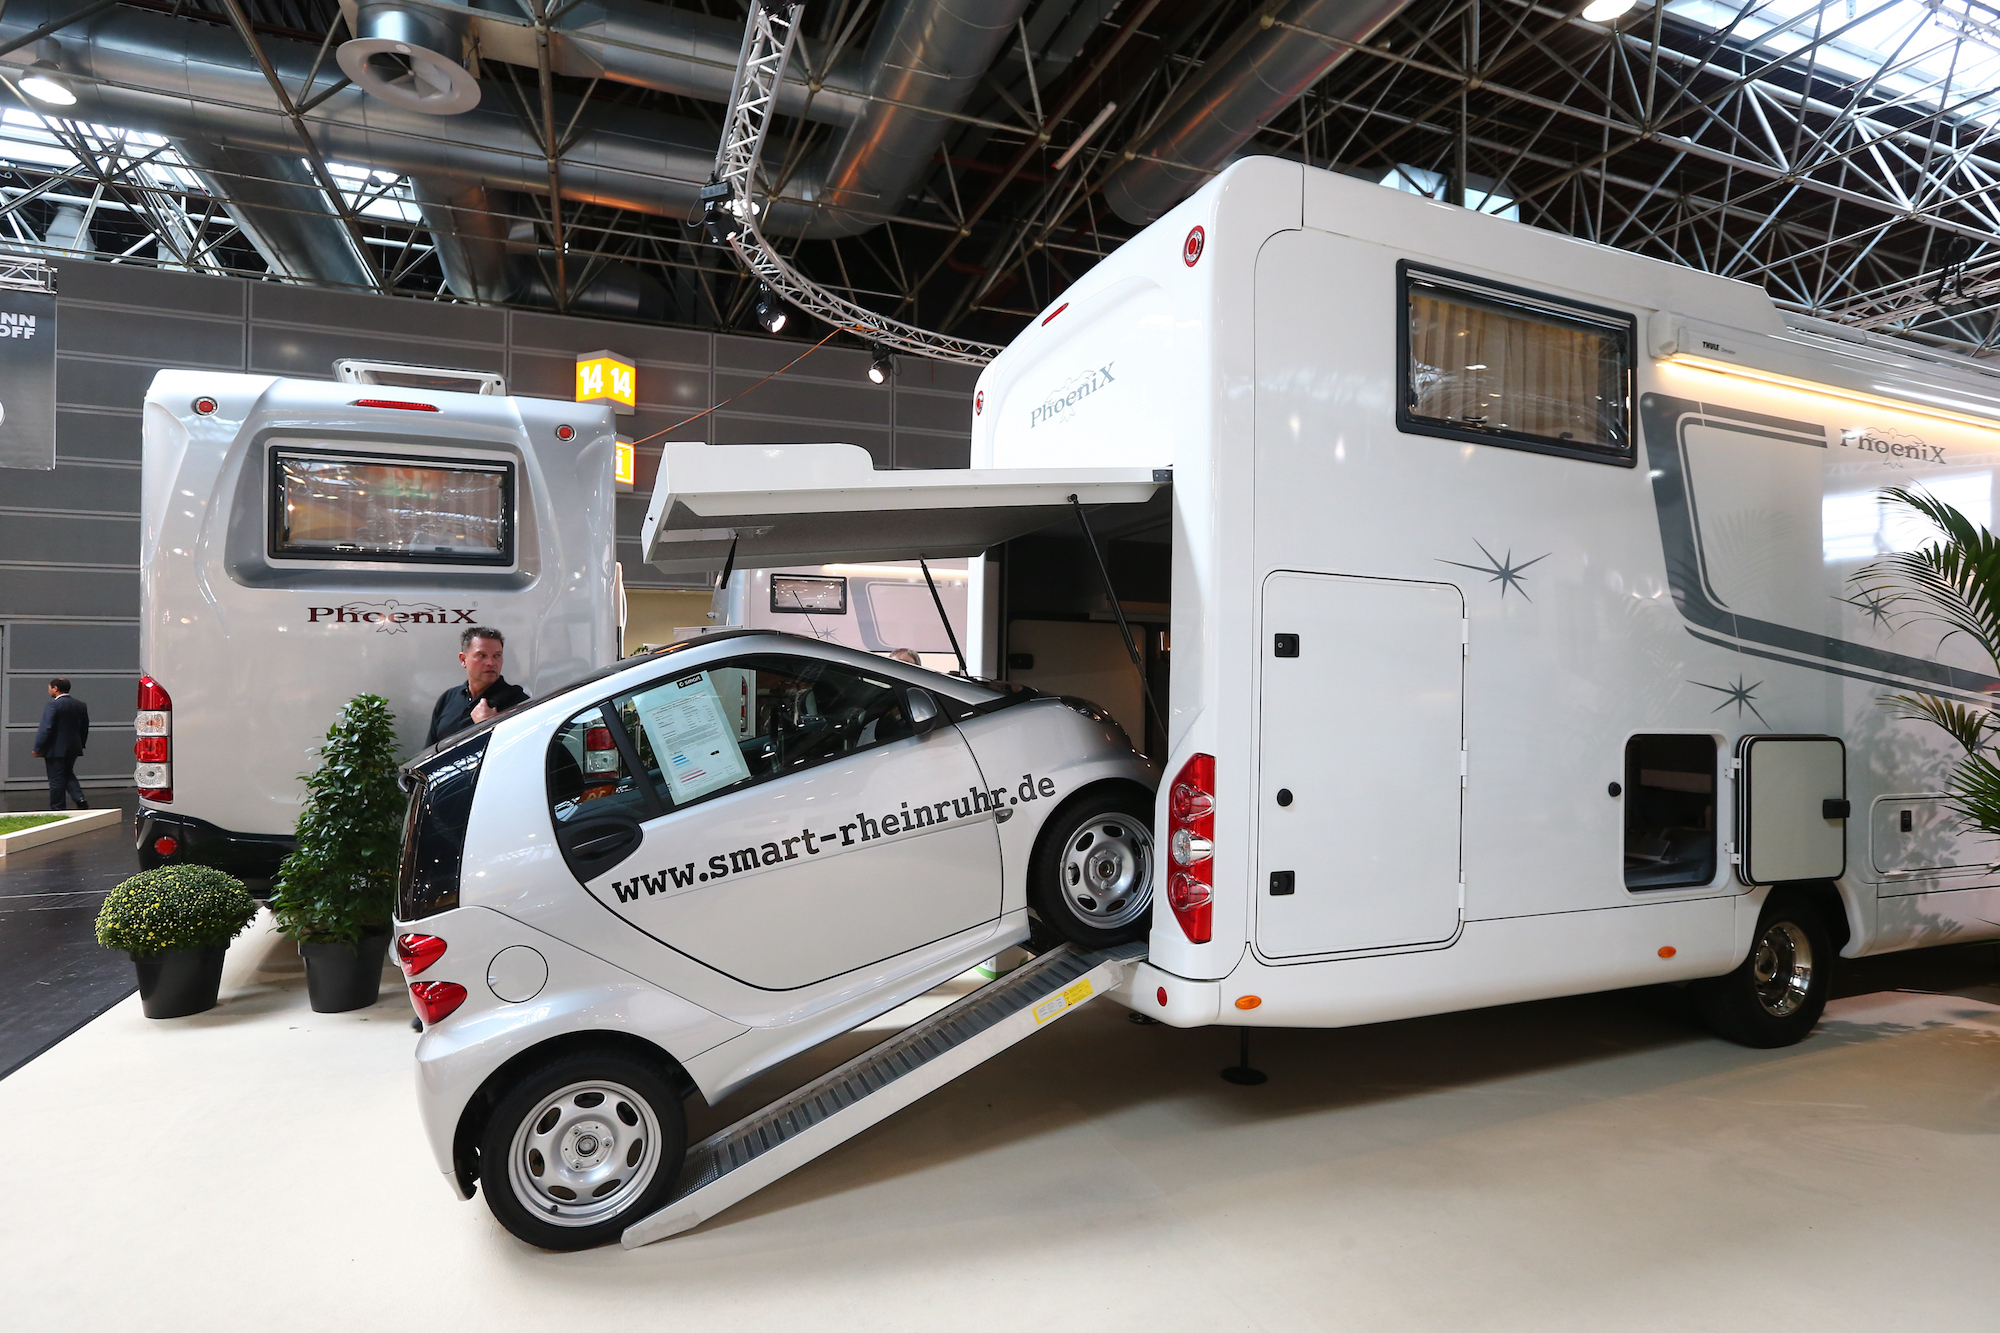 A SmartCar on a ramp leading into a toy hauler motorcoach at Caravan Salon Duesseldorf expo in Germany on September 4, 2014